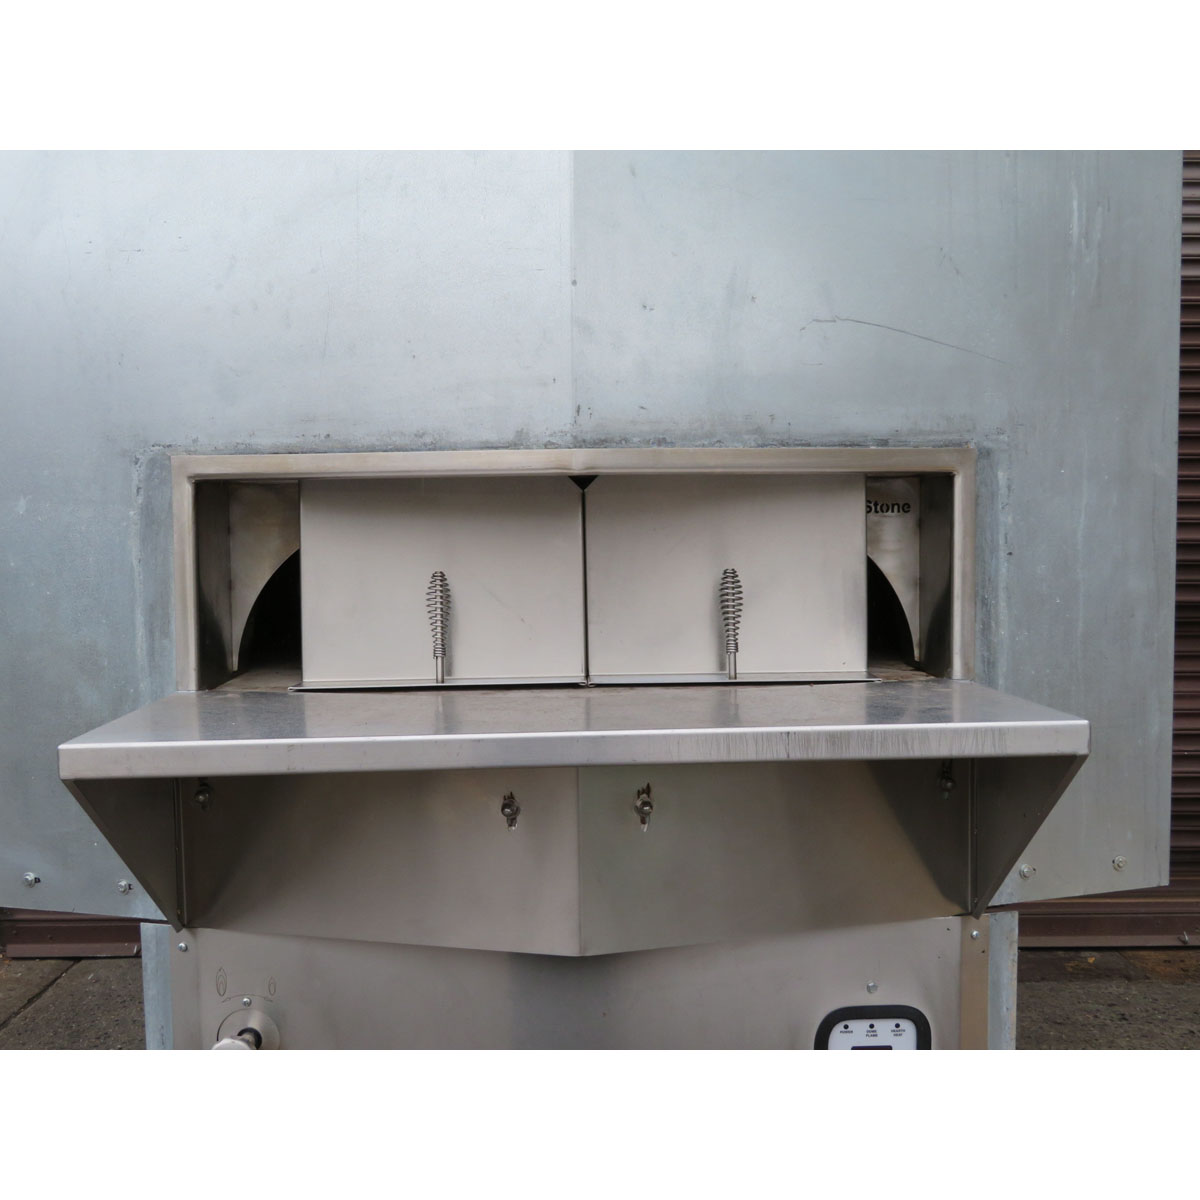 Woodstone WS-MS-6-RFG-IR-NG Pizza Oven, Used Very Good Condition image 11